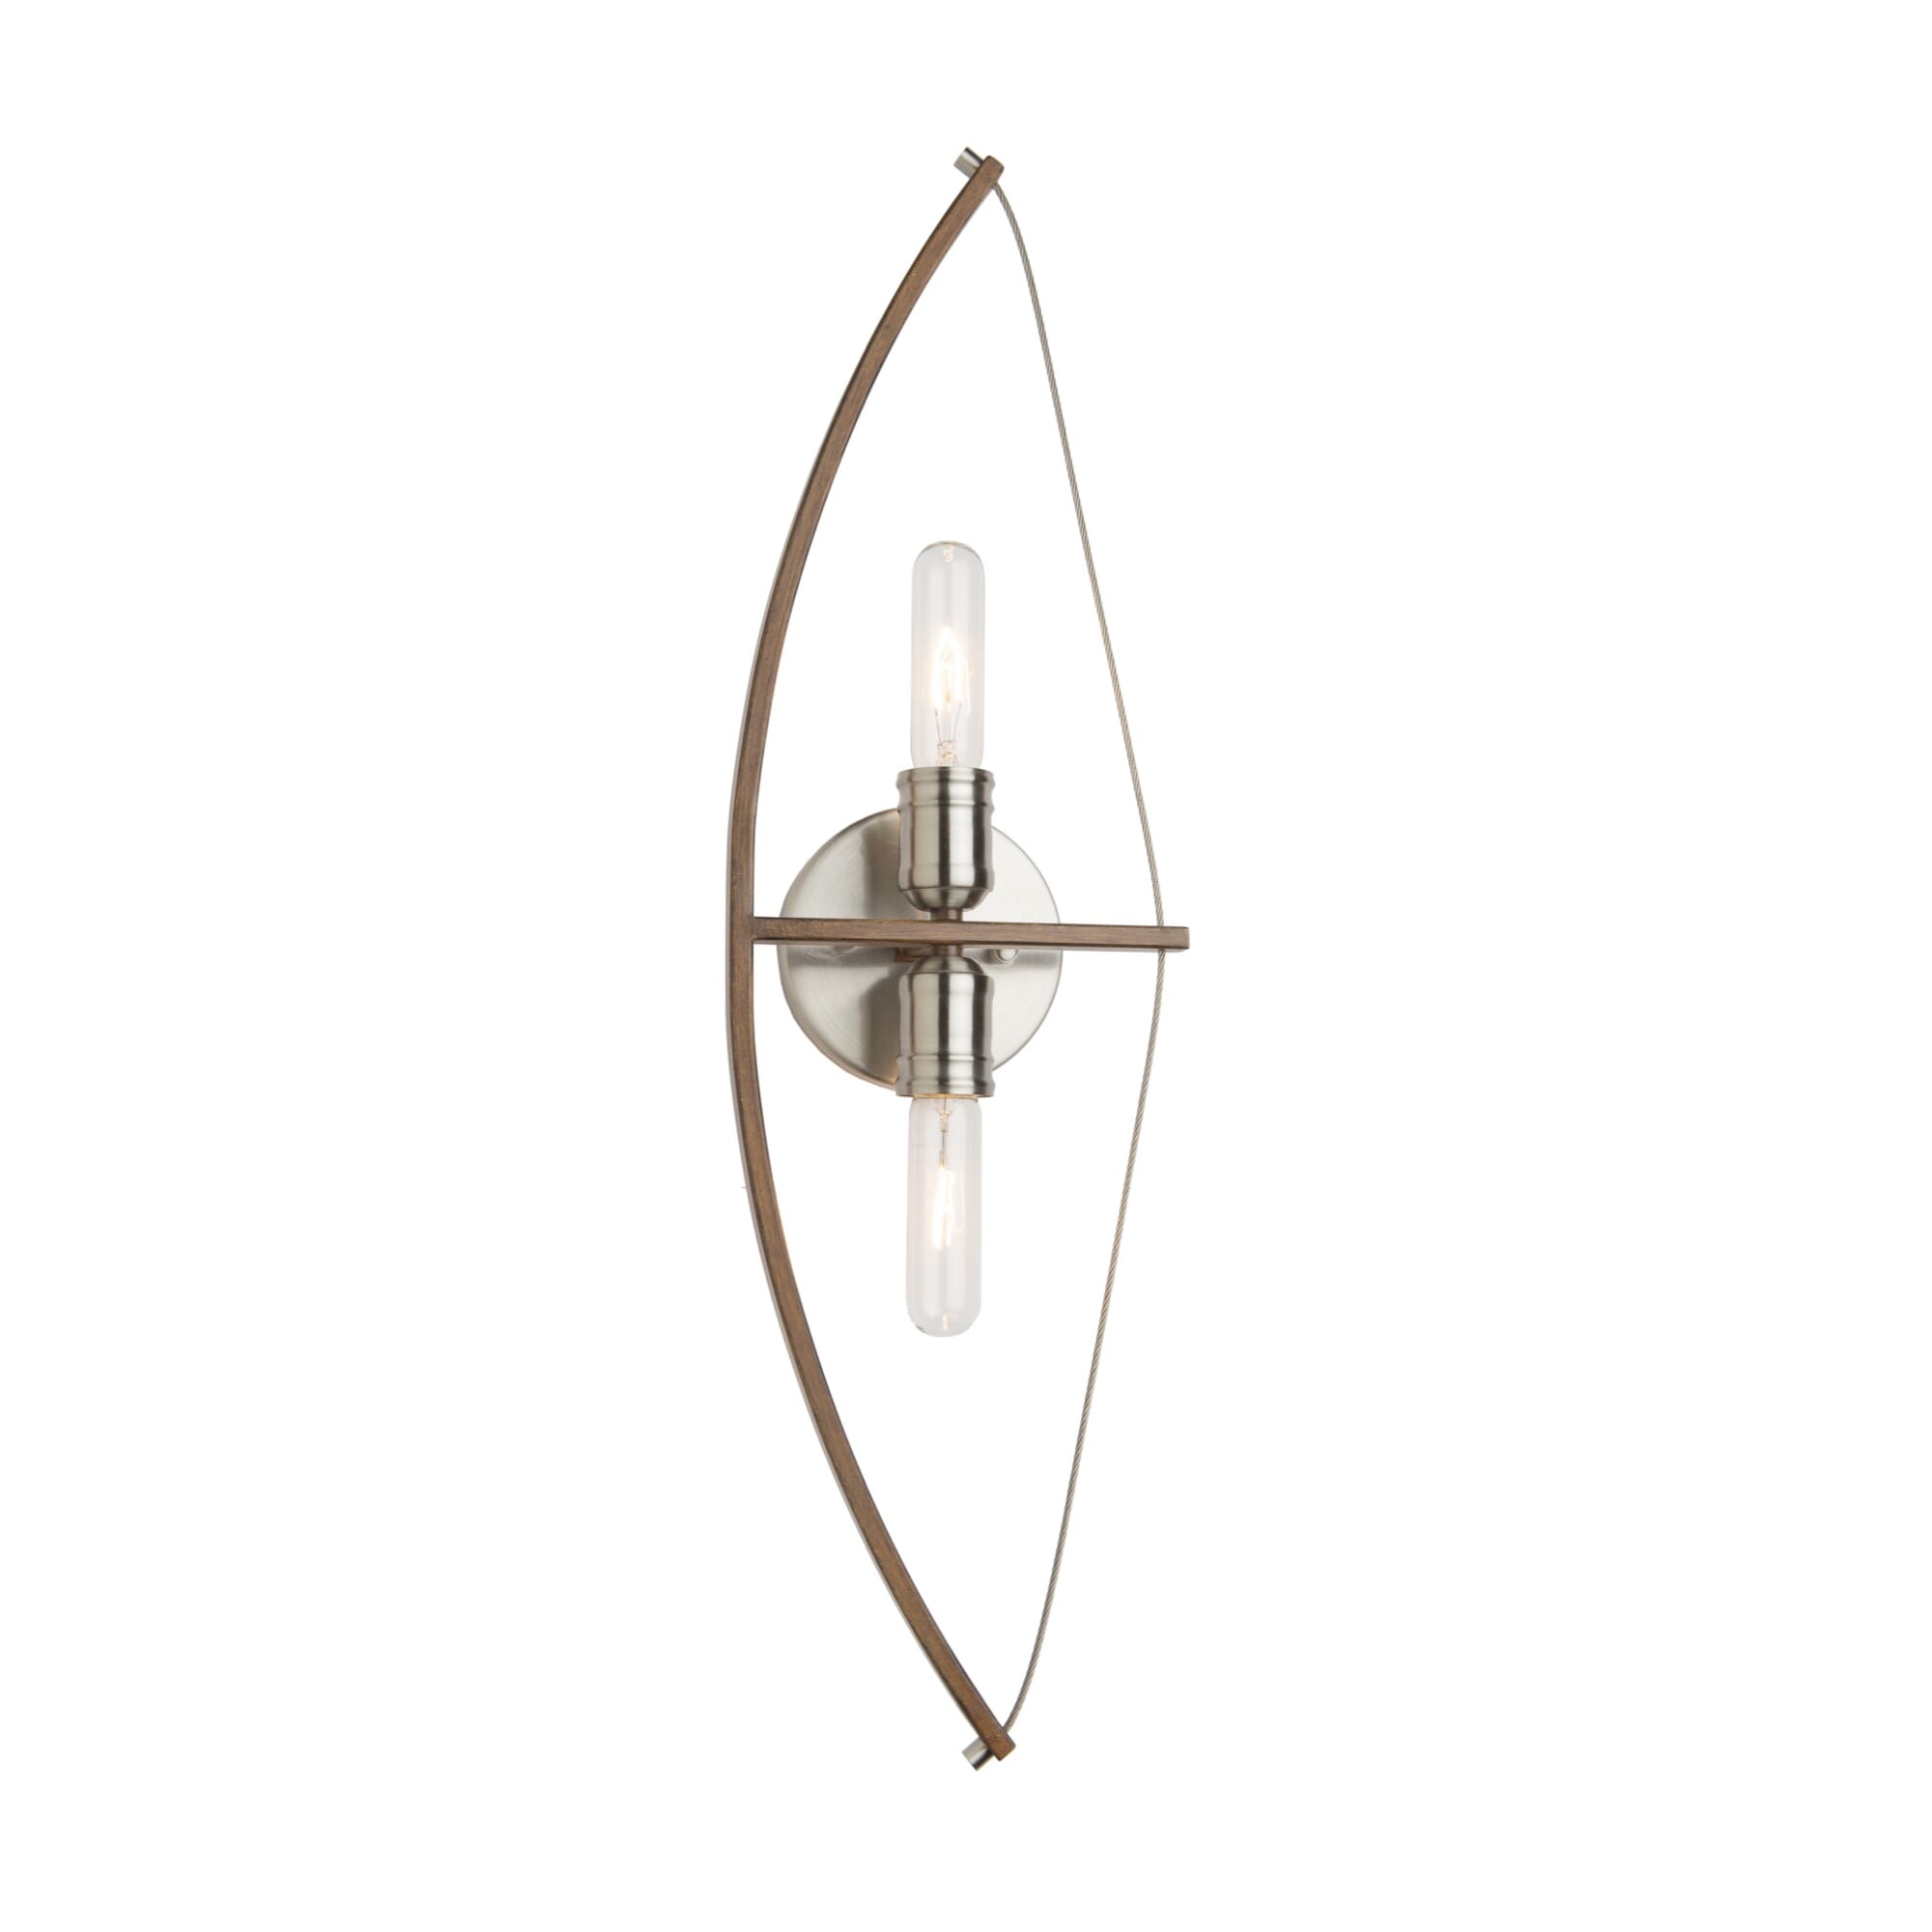 Artcraft Arco 2-Light Wall Sconce in Faux Wood & Brushed Nickel -  Artcraft Lighting, AC11485